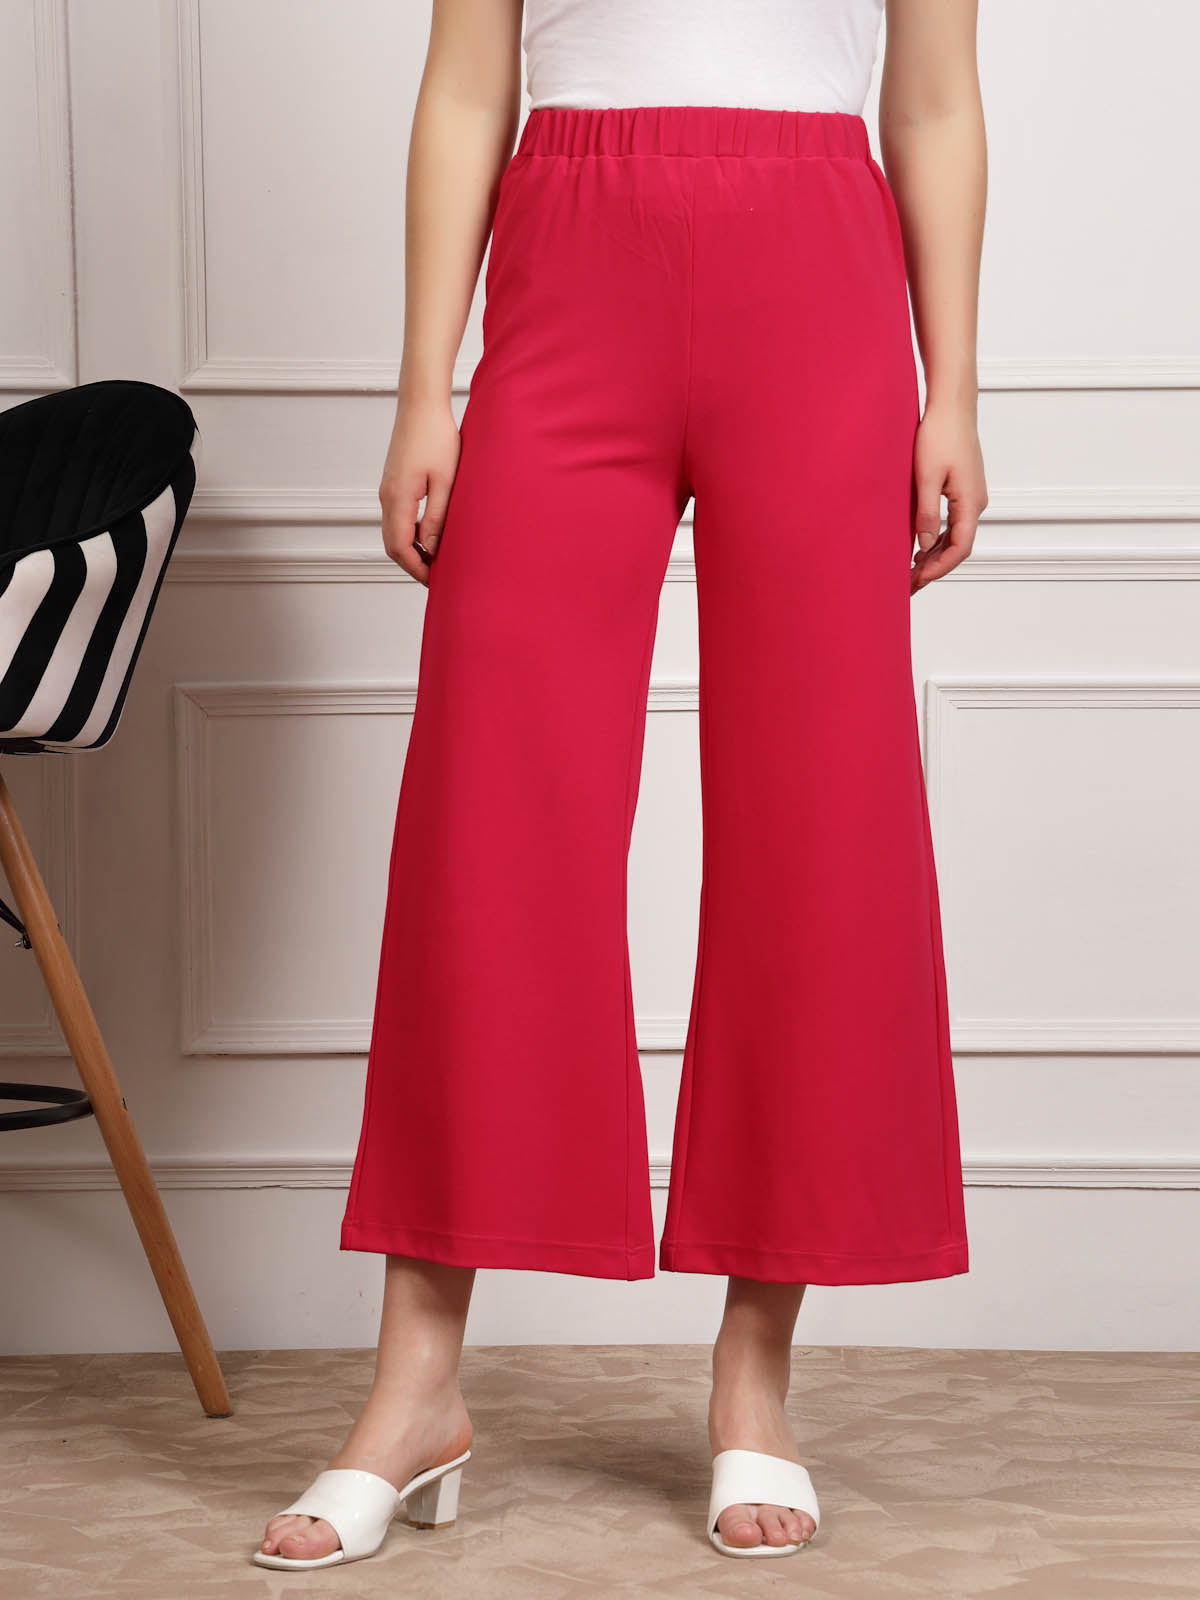 Buy Black Pleated Parallel Pants Online - W for Woman